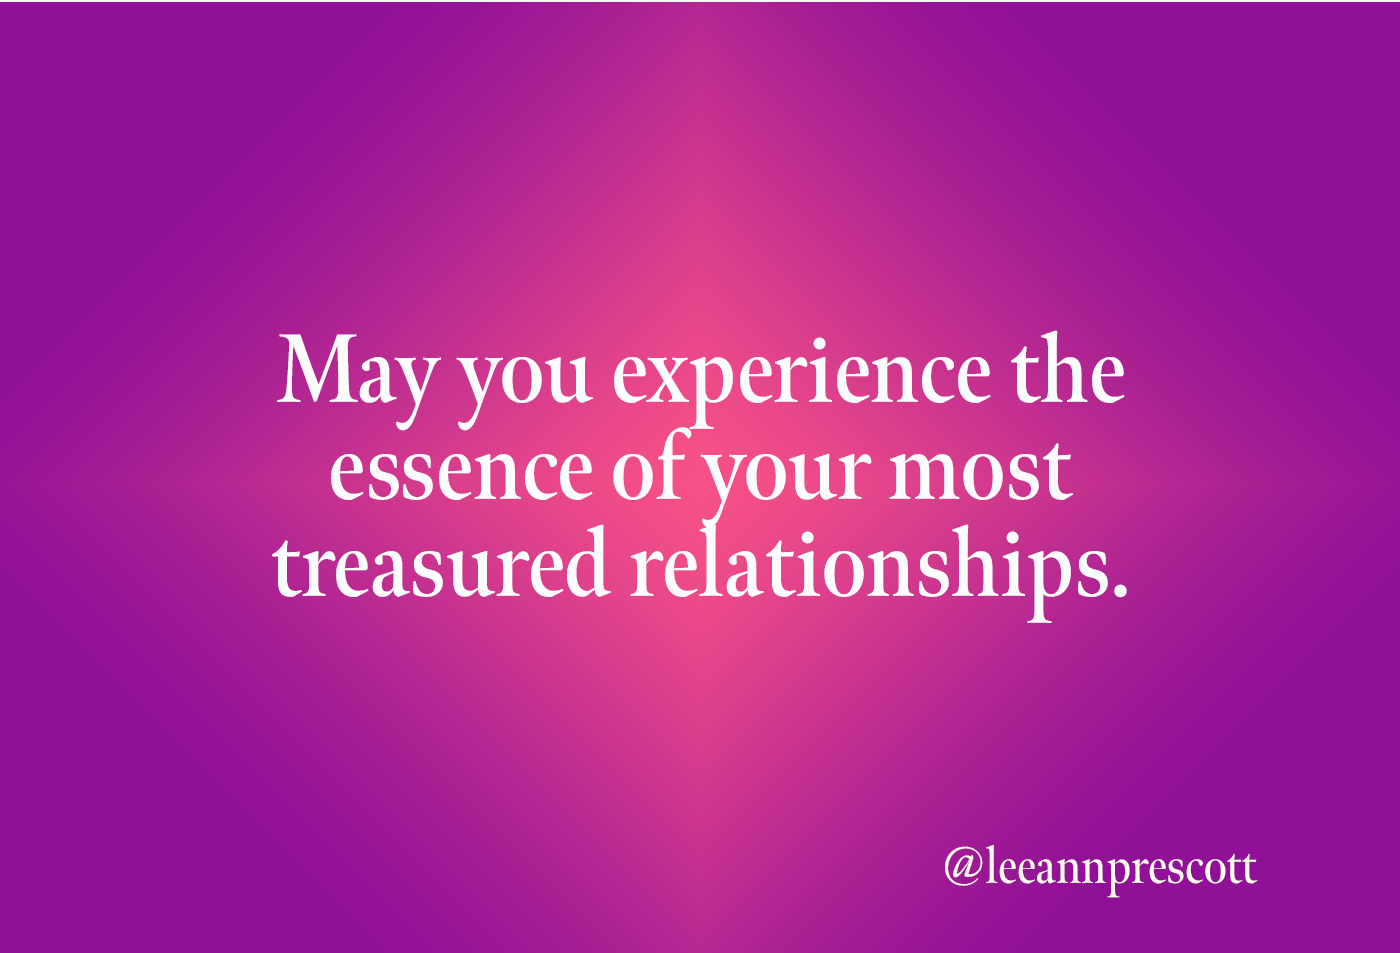 May you experience the essence of your most treasured relationships